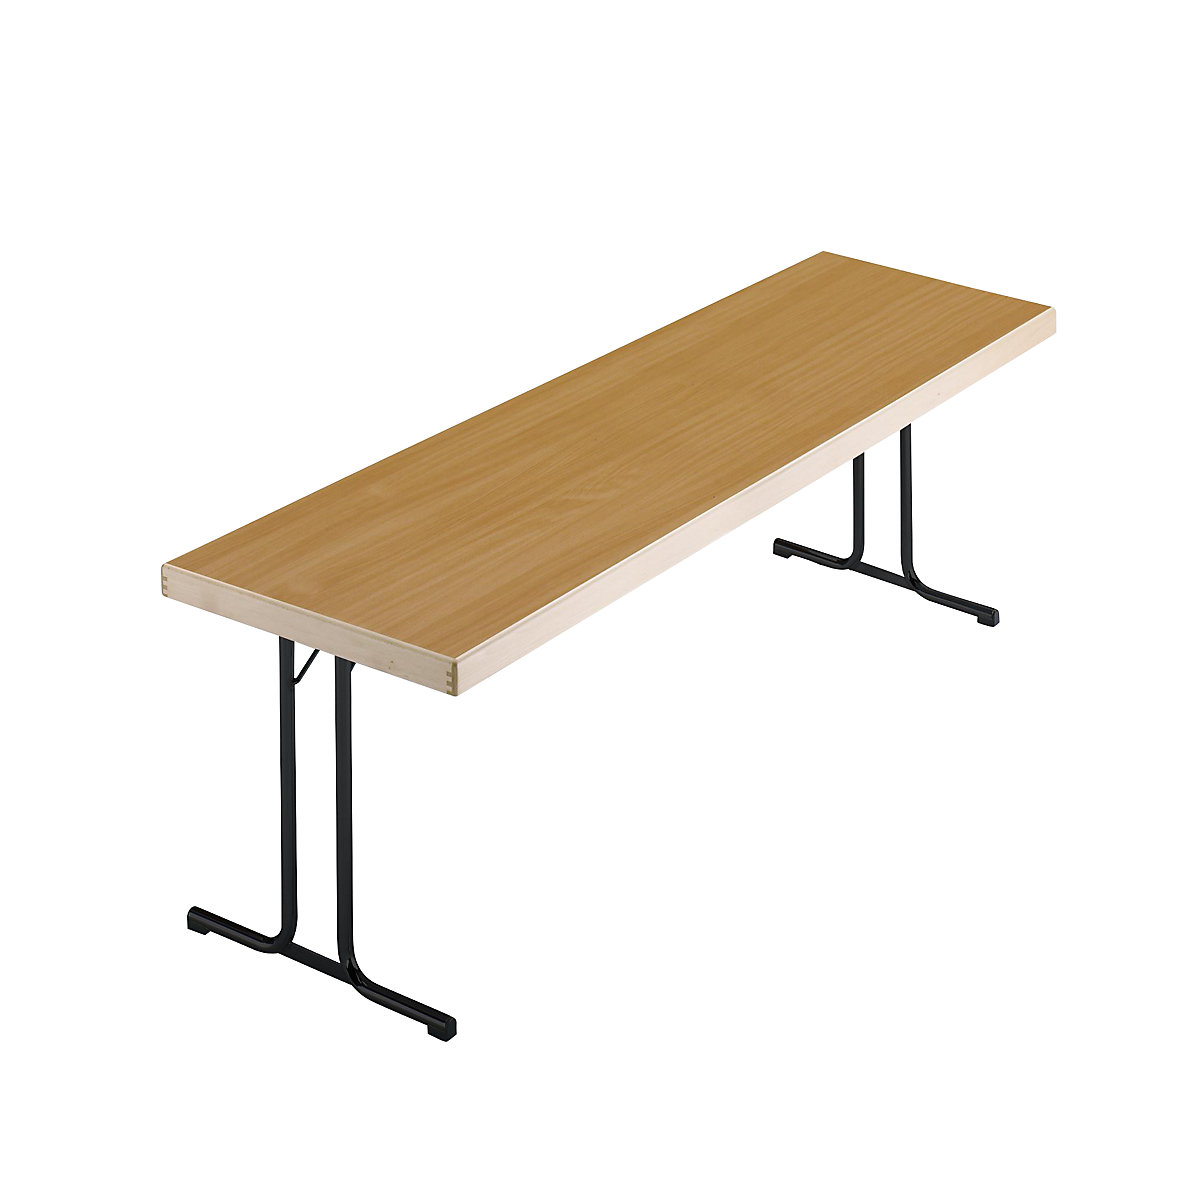 Folding table, double T-foot stand, 1700 x 700 mm, charcoal frame, beech finish tabletop-12